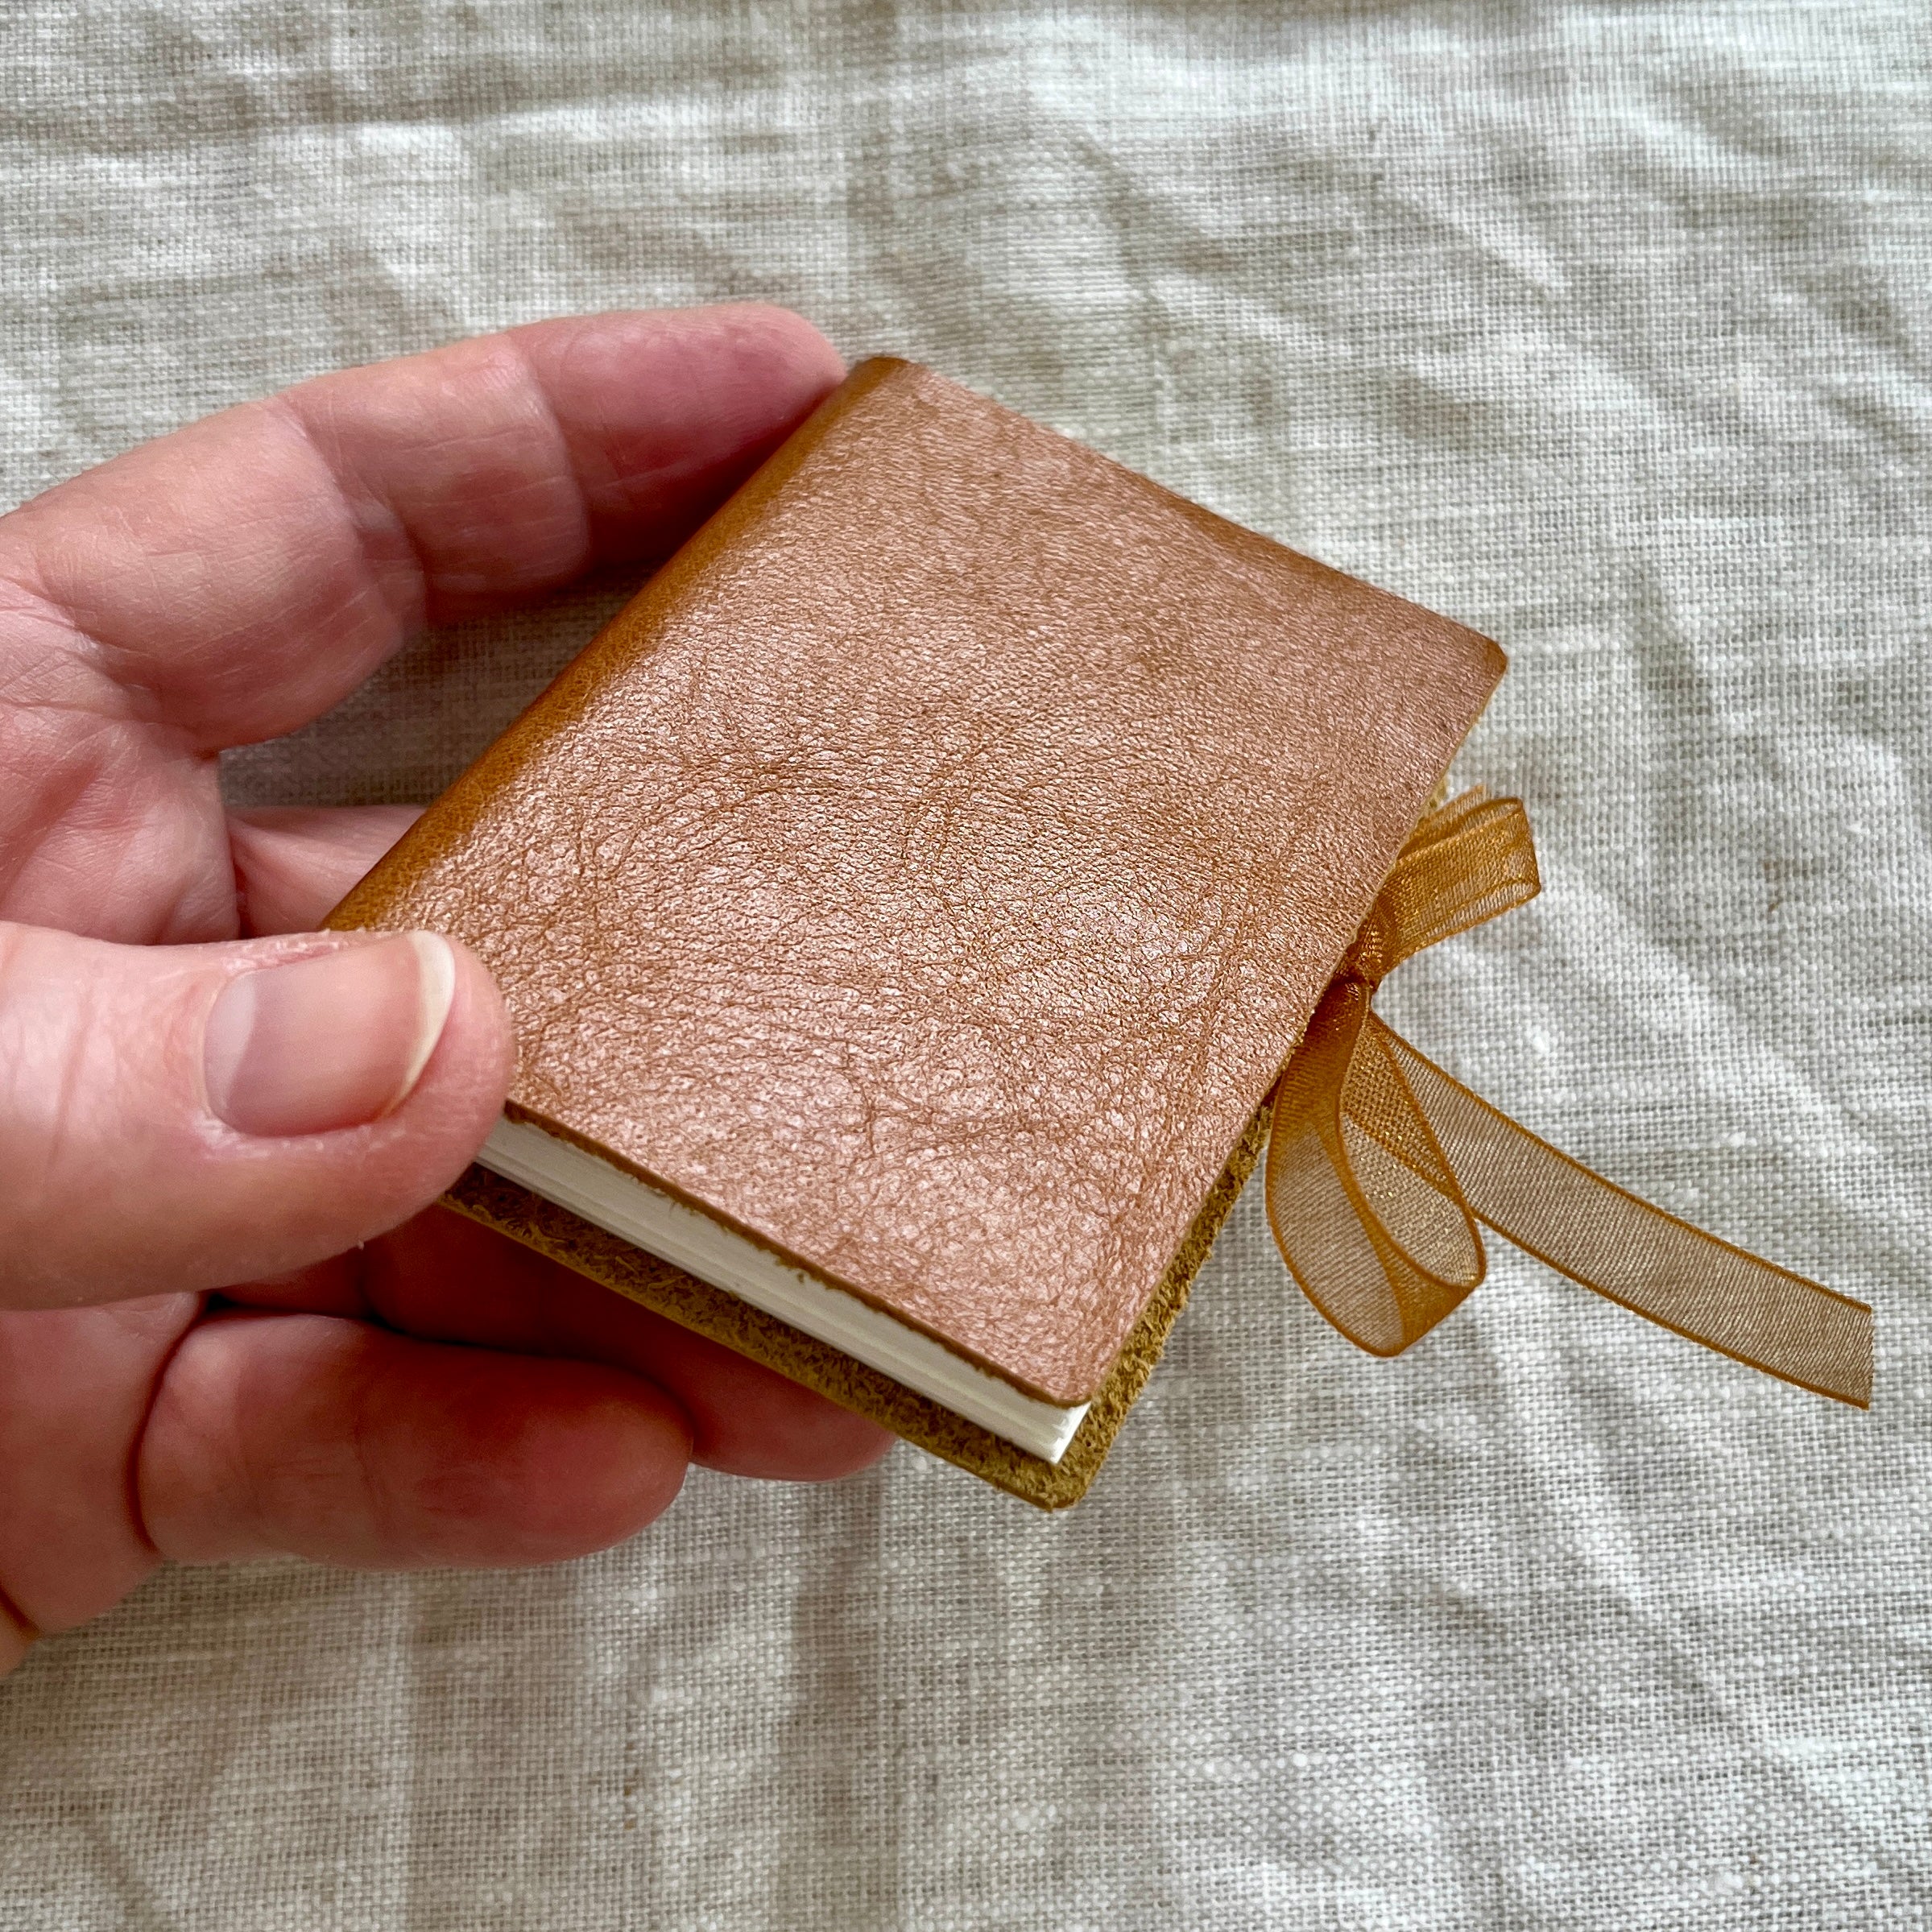 Midi handmade journal in genuine leather - blank pages